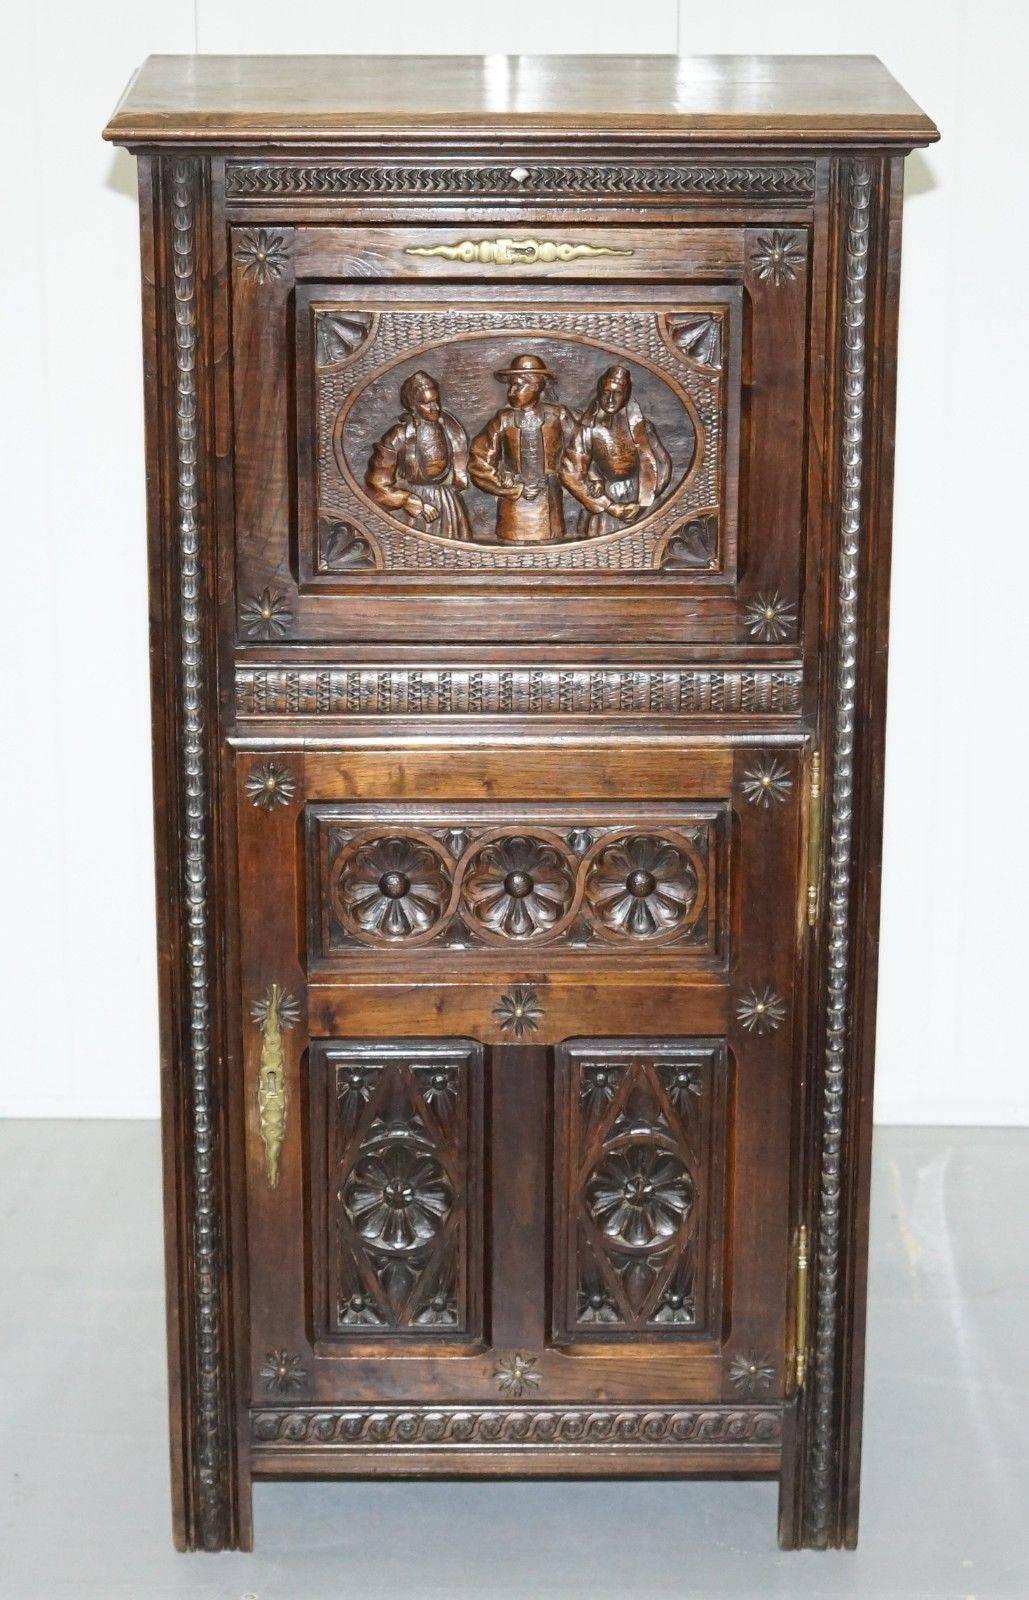 We are delighted to offer for sale this stunning hand-carved Dutch cabinet depicting rural scenes from the very early 19th century.

A very good looking and well-made piece depicting a rural scene from Holland

The unit is tall boy size, it